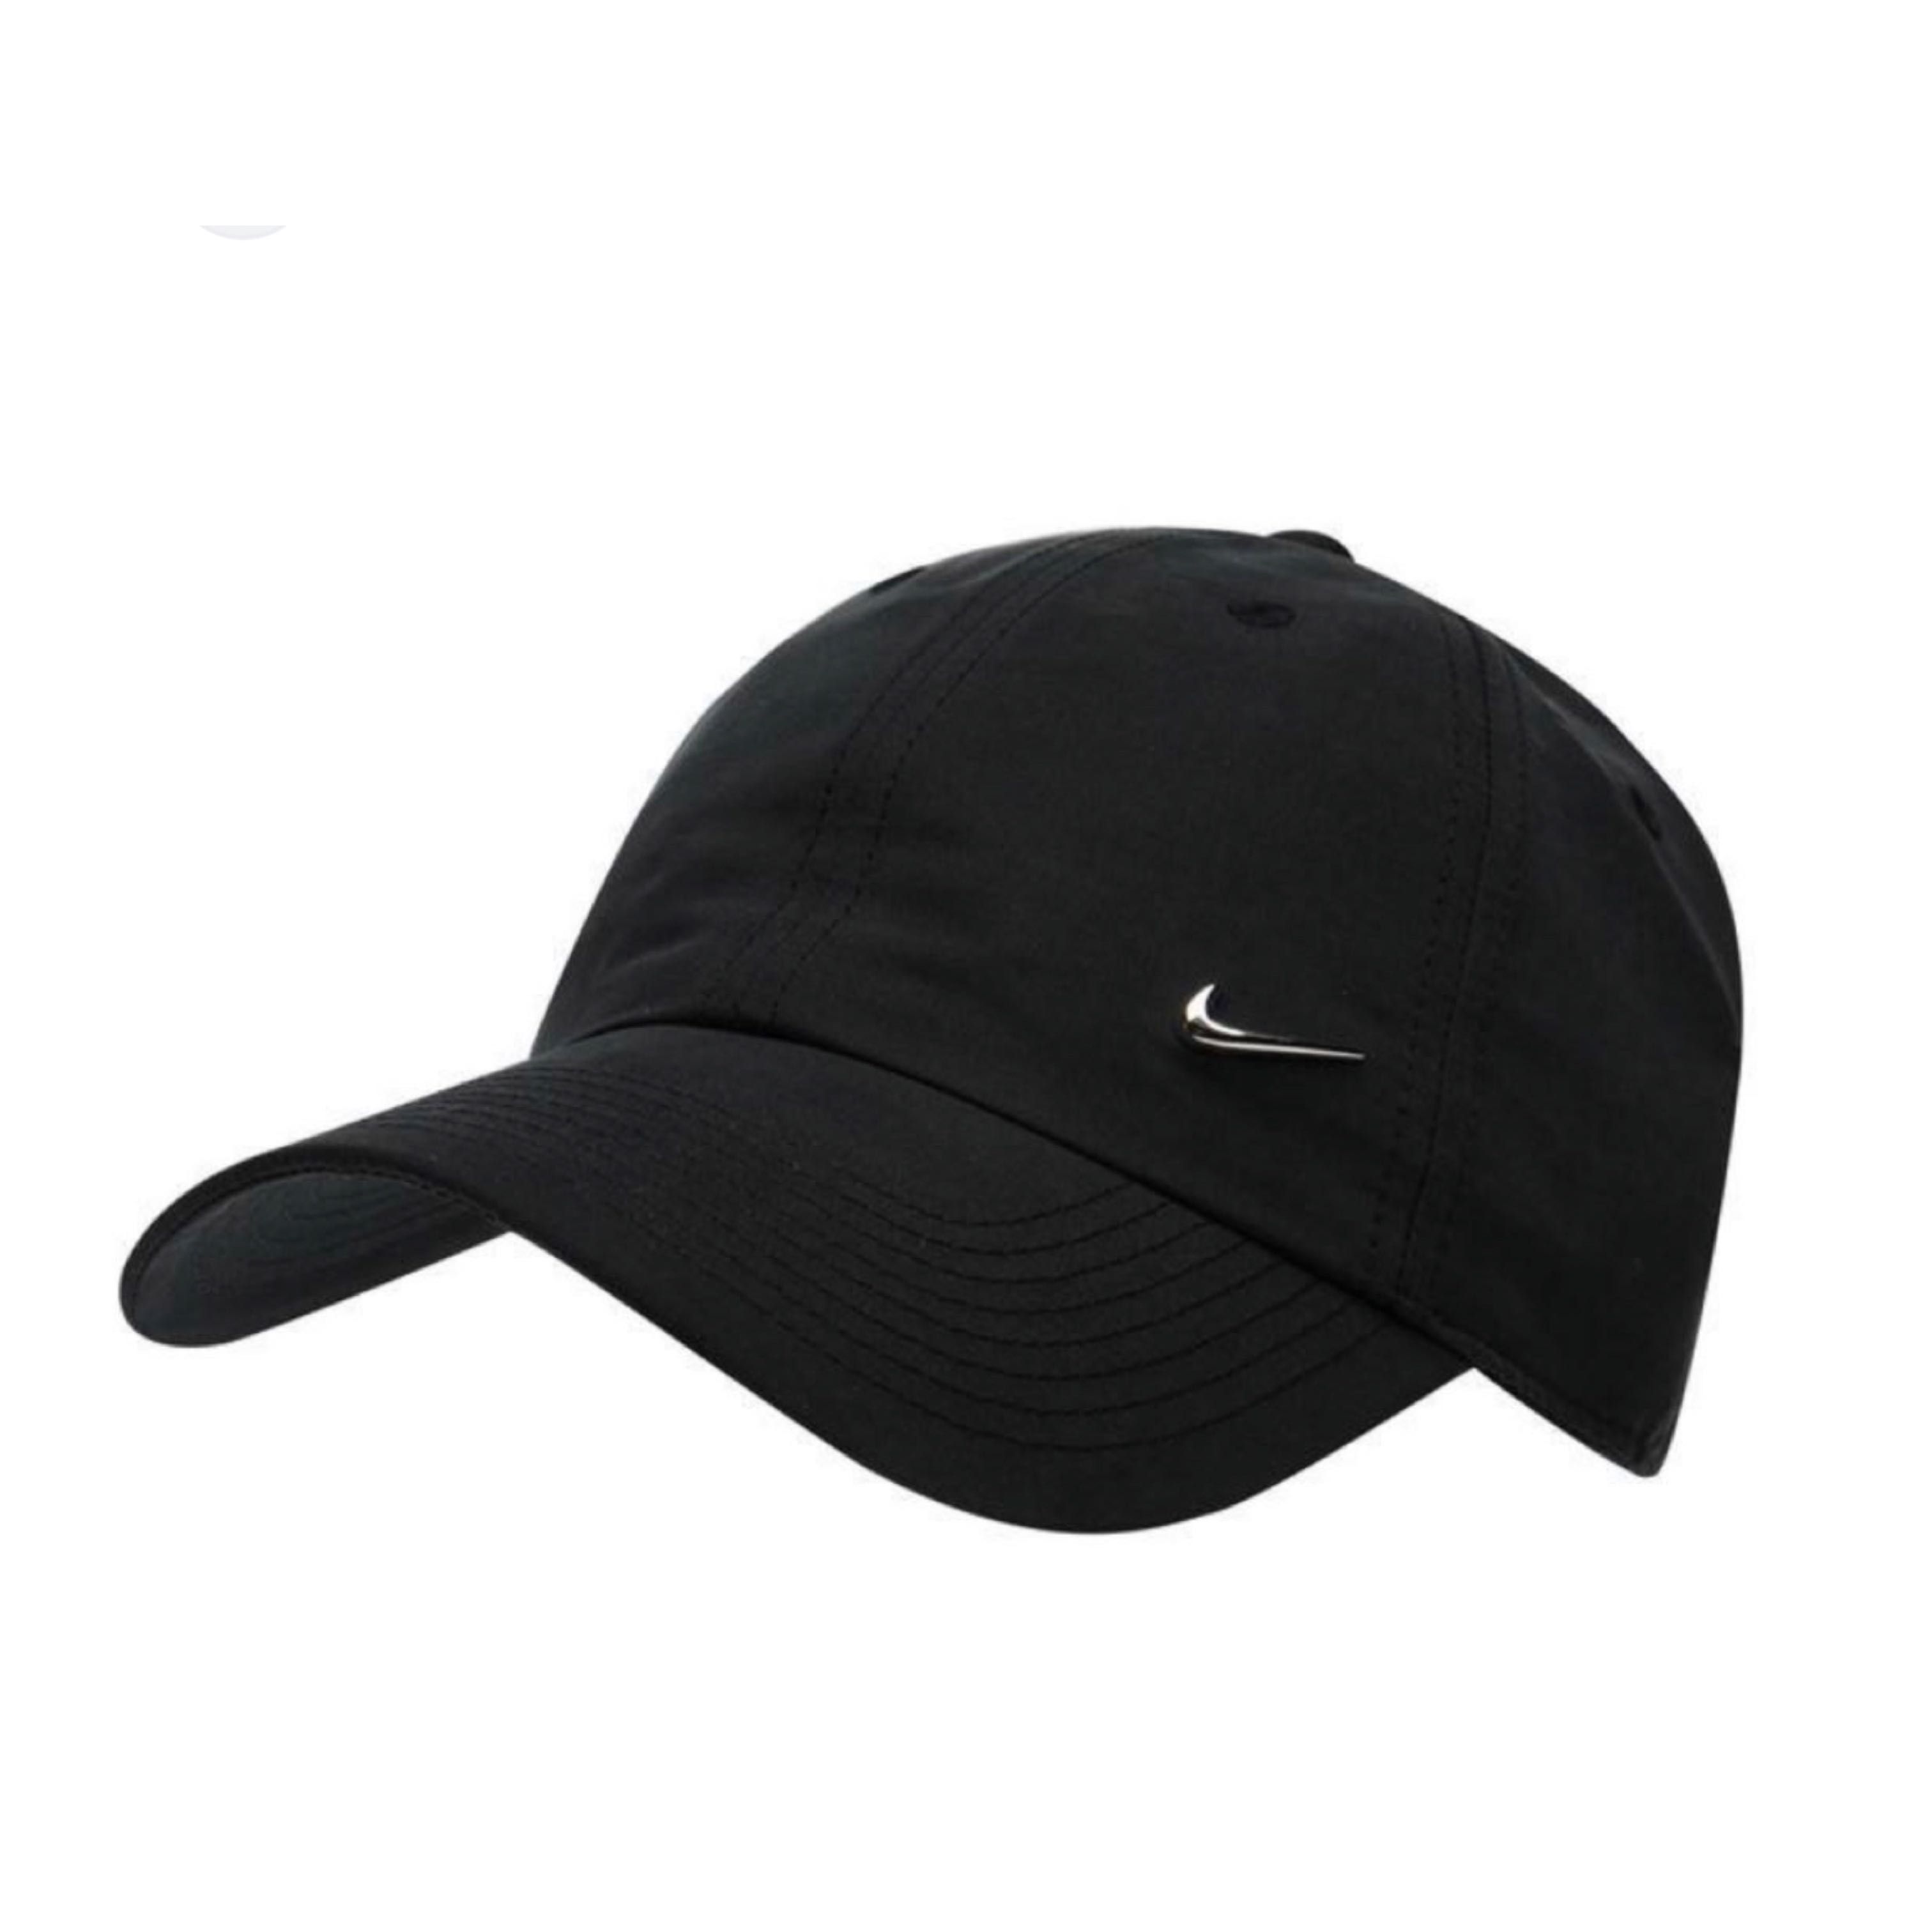 Nike Metal Swoosh Cap (in Black), Men's Fashion, Watches & Accessories, Caps  & Hats on Carousell